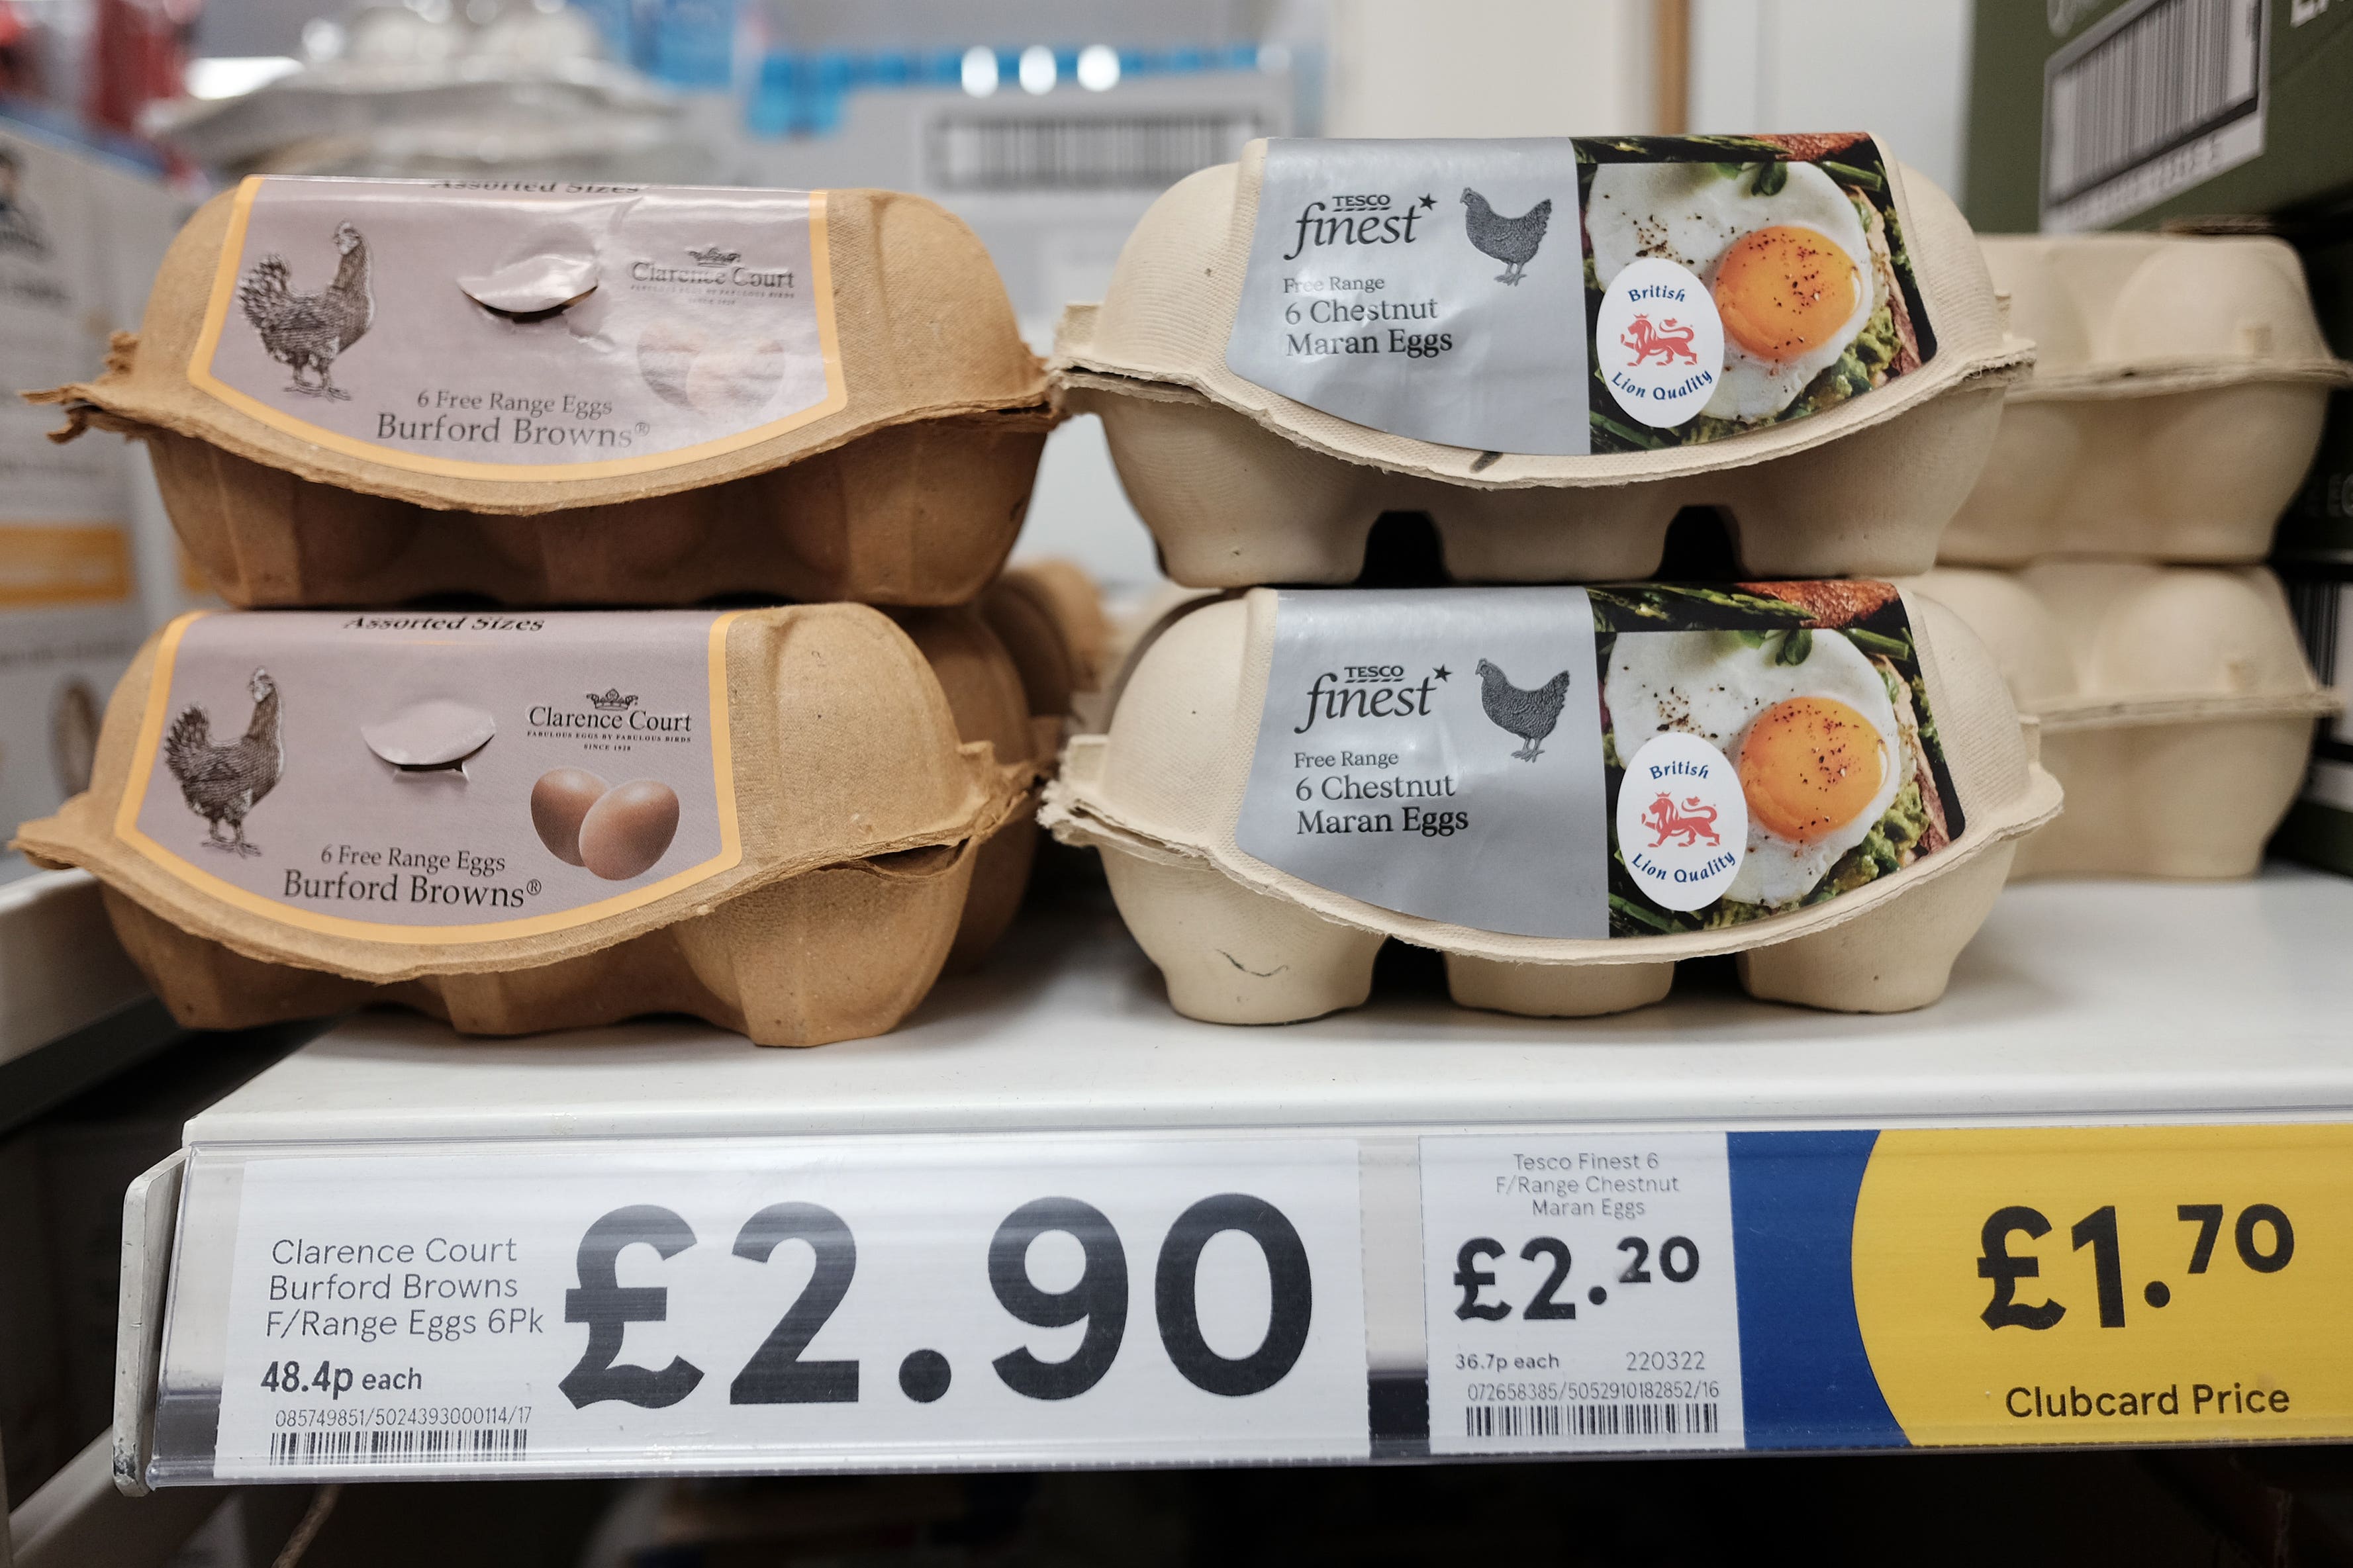 Tesco has joined other supermarkets in limiting purchases of eggs amid supply disruption (Yui Mok/PA)